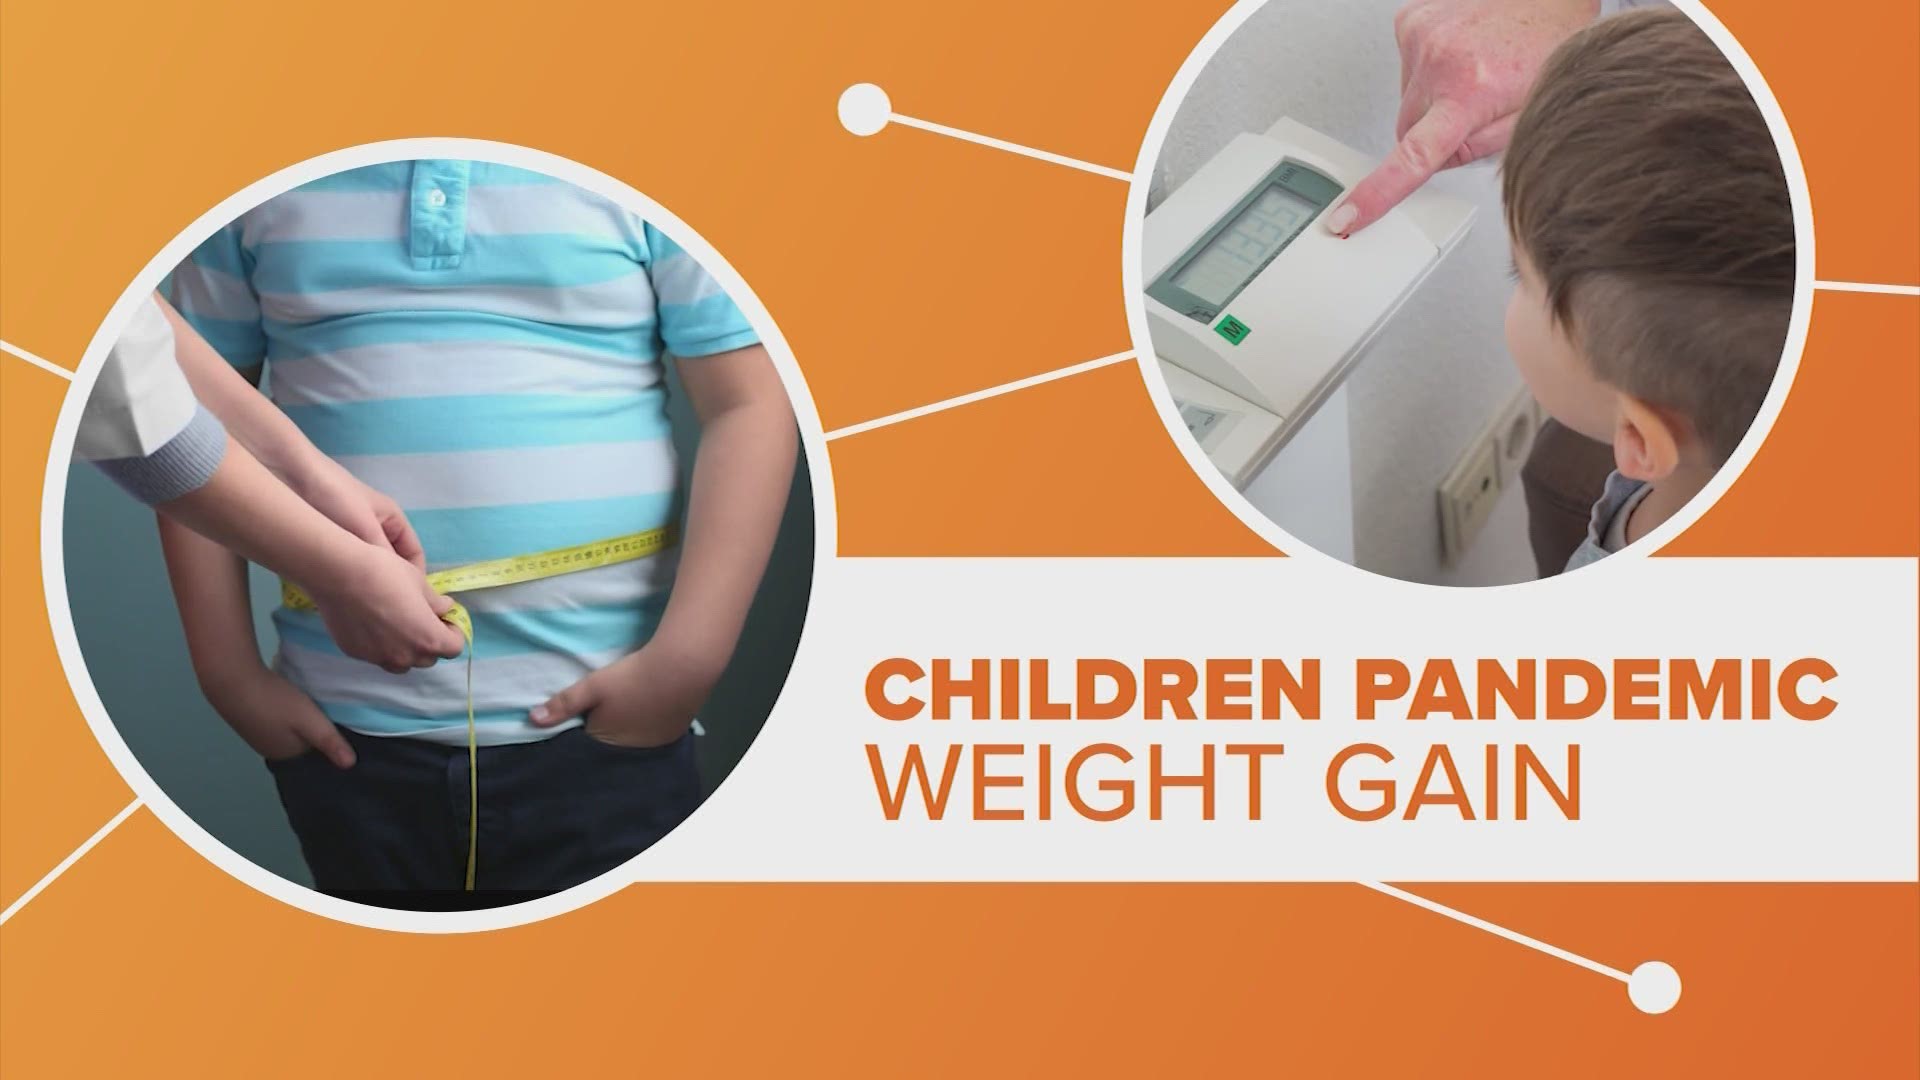 Doctors are concerned about kids packing on the pounds during the pandemic. So how can parents help? Let's connect the dots.